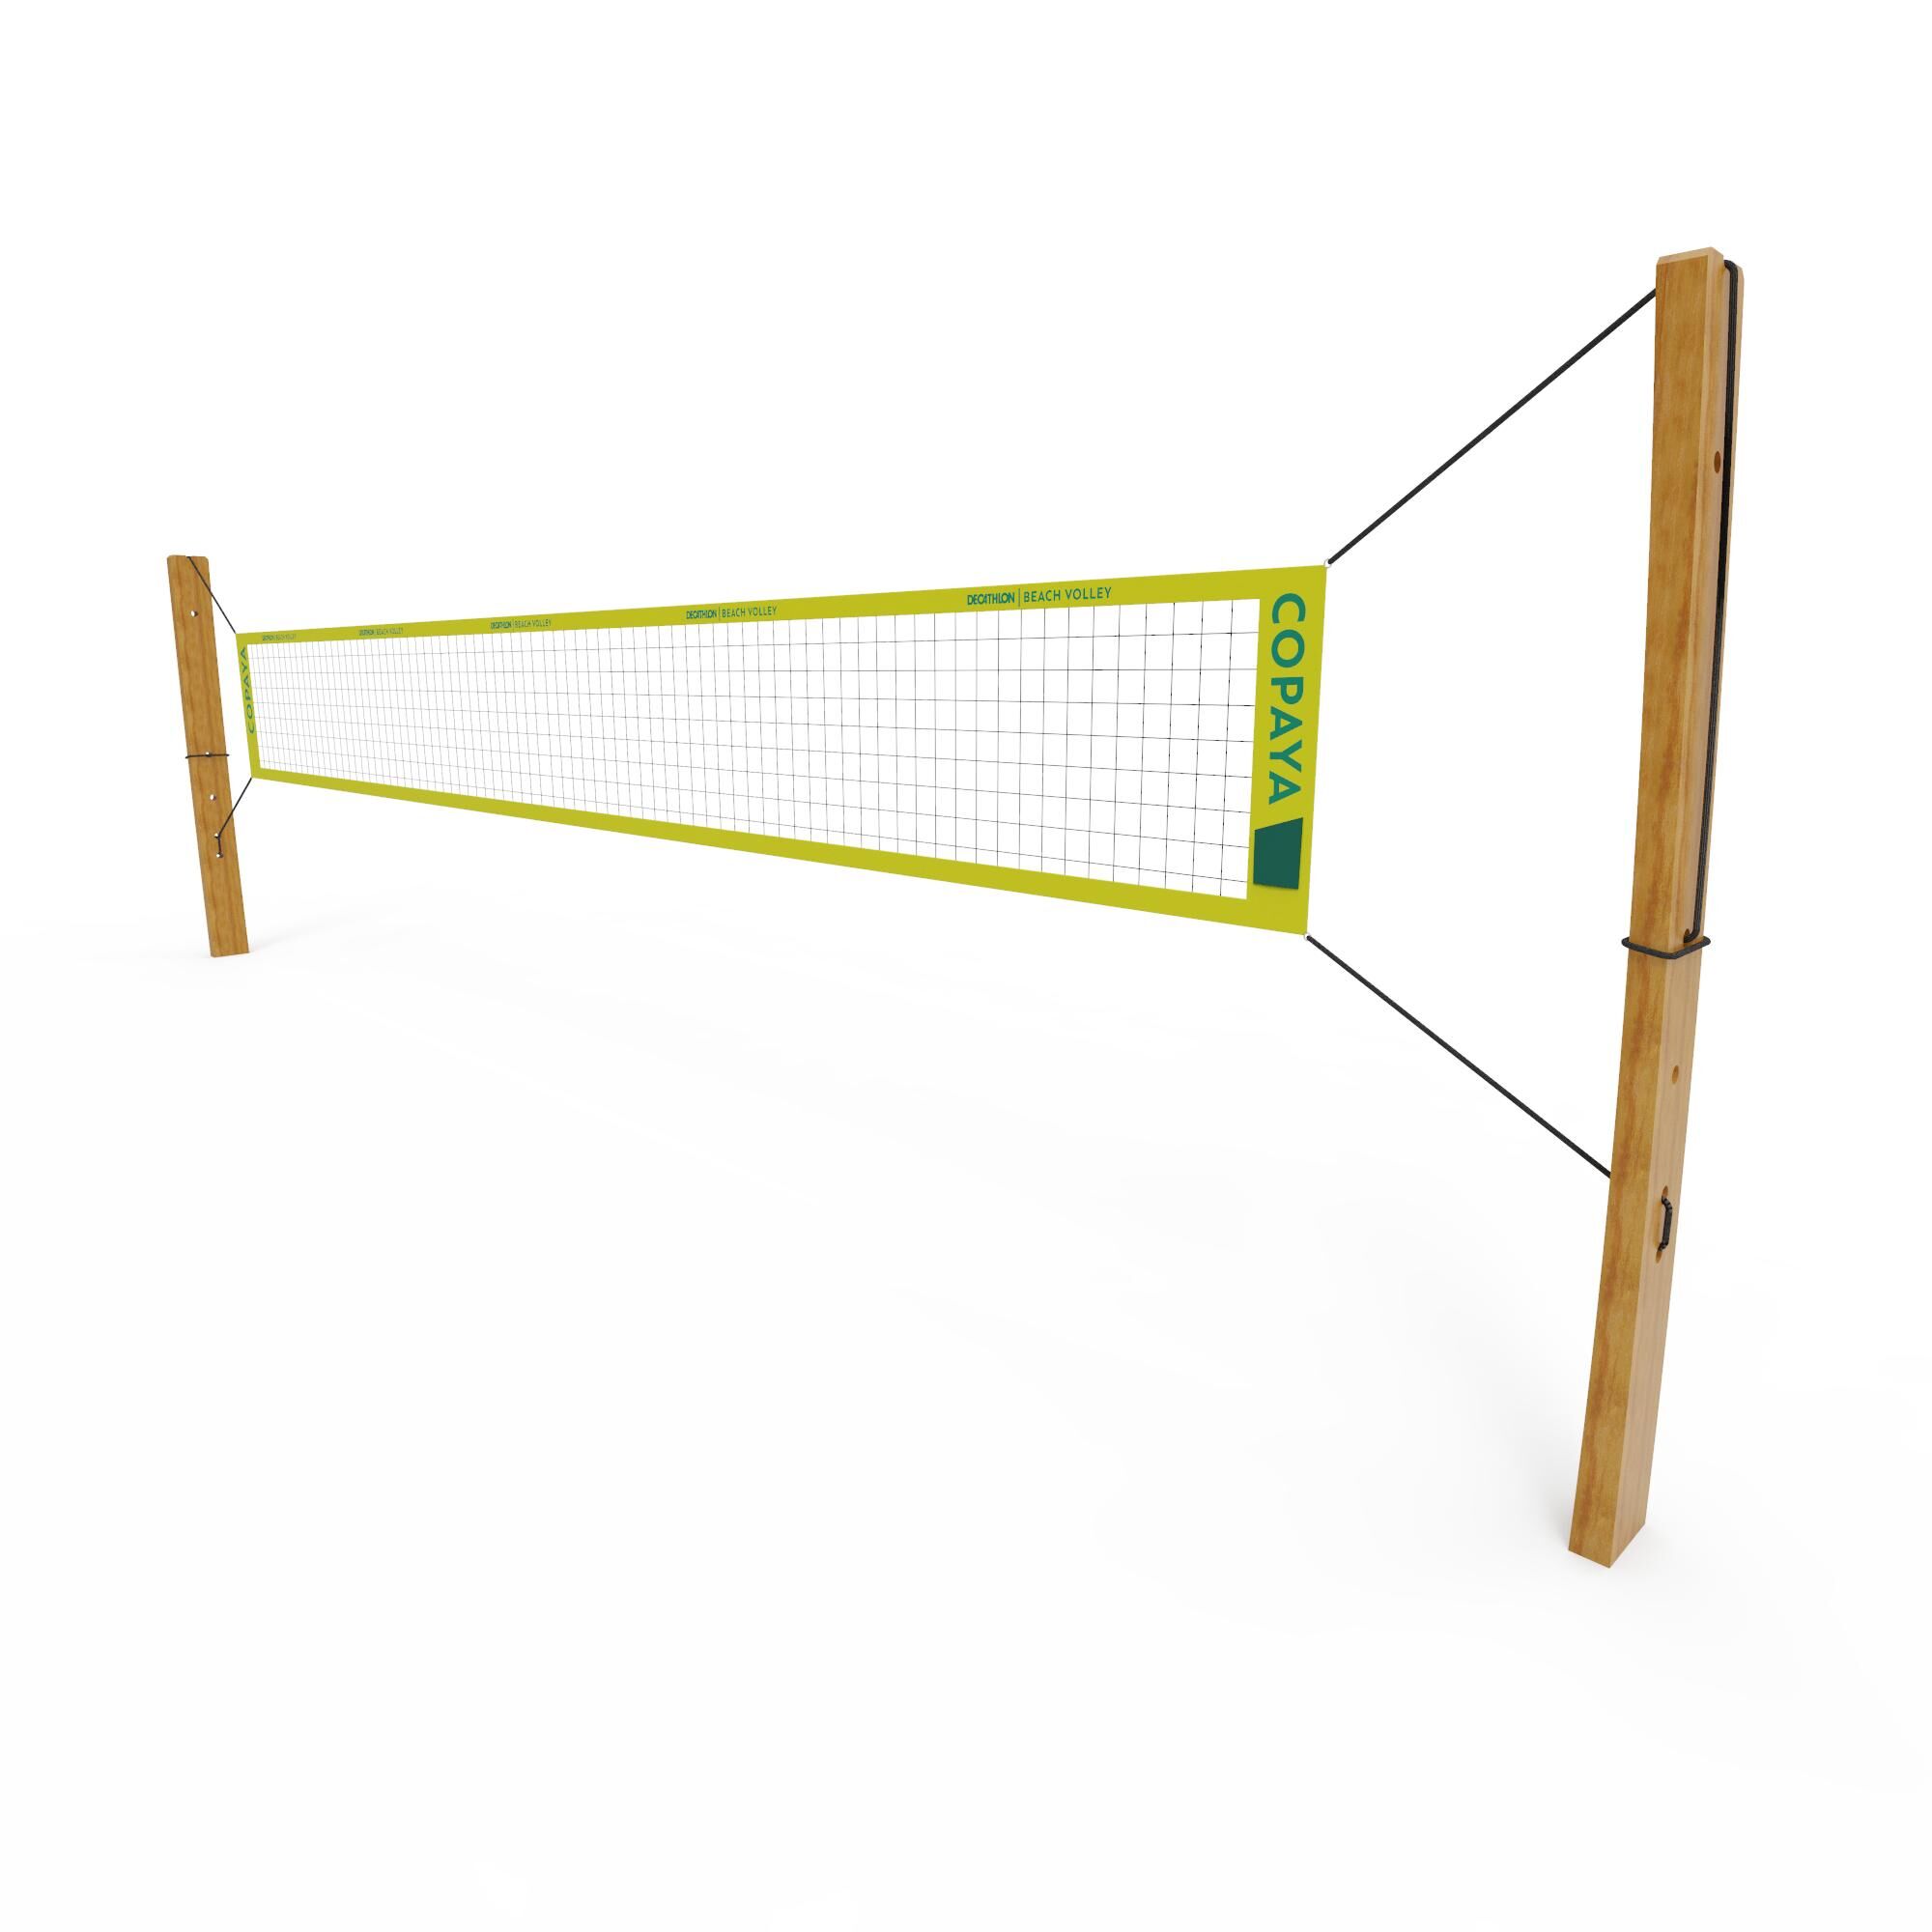 KIPSTA Beach Volleyball Net with Official Dimensions BVN900